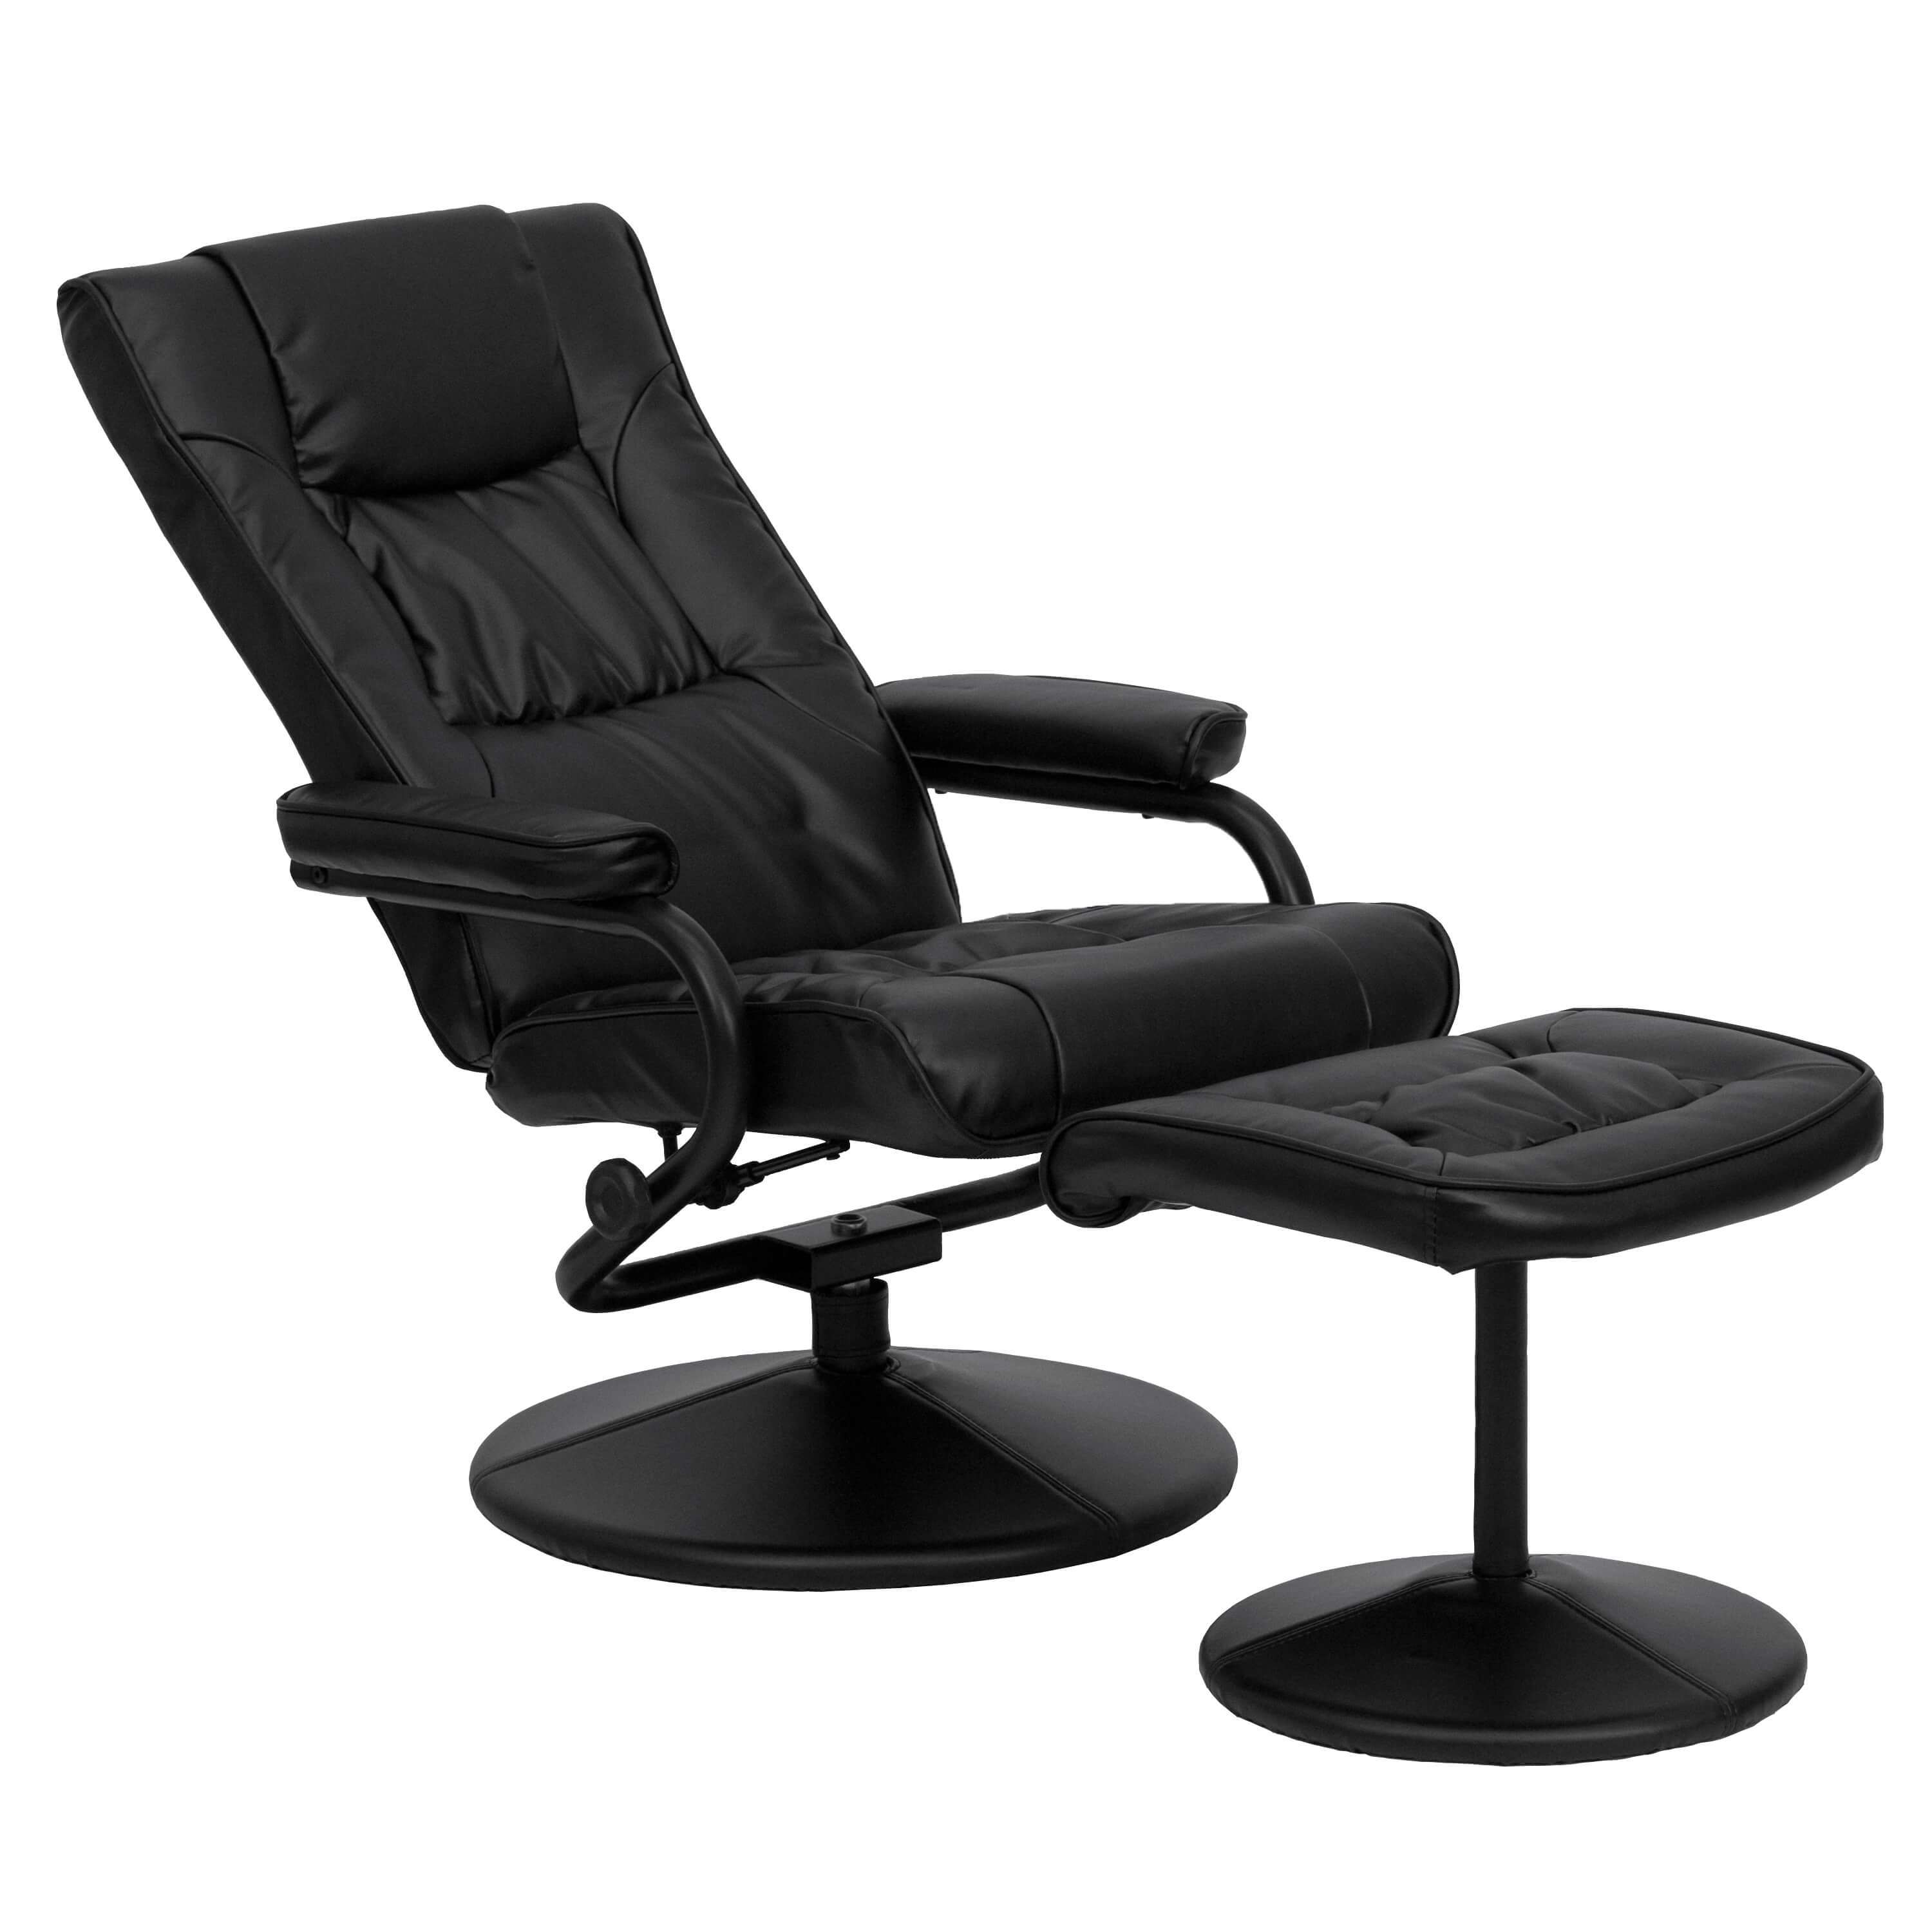 Contemporary recliner with ottoman reclined view